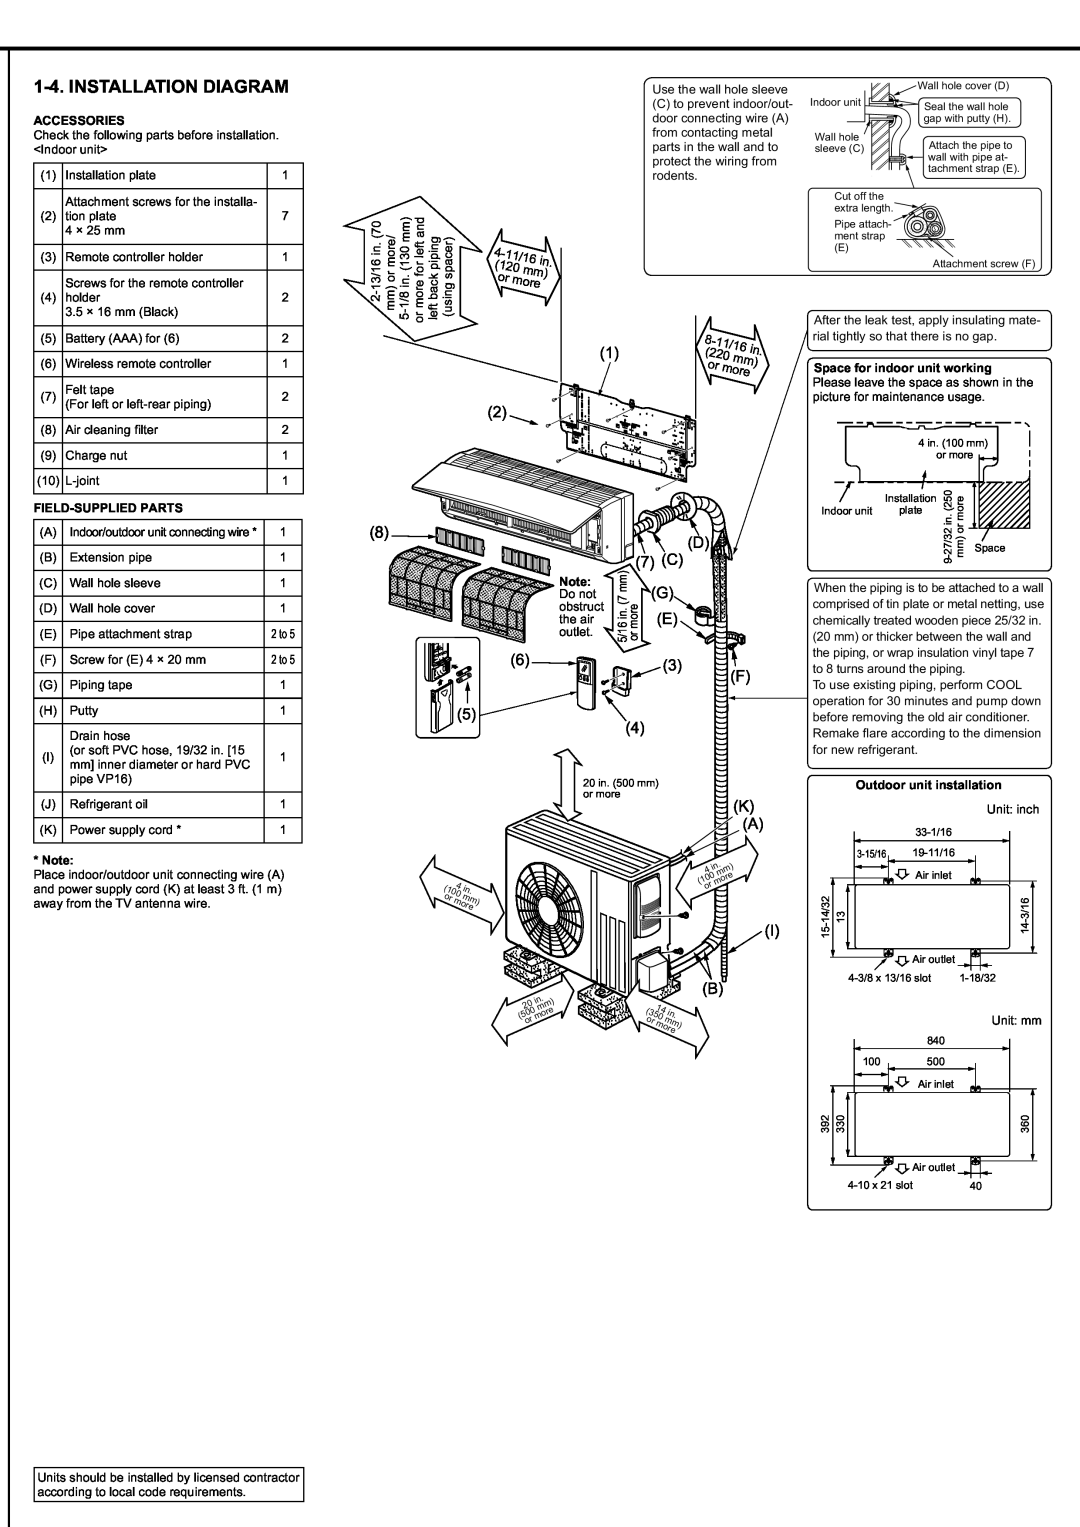 Mitsubishi Electronics MSY-D30/36NA, MSZ-D30/36NA Installation Diagram, more, Accessories, Field-Supplied Parts 